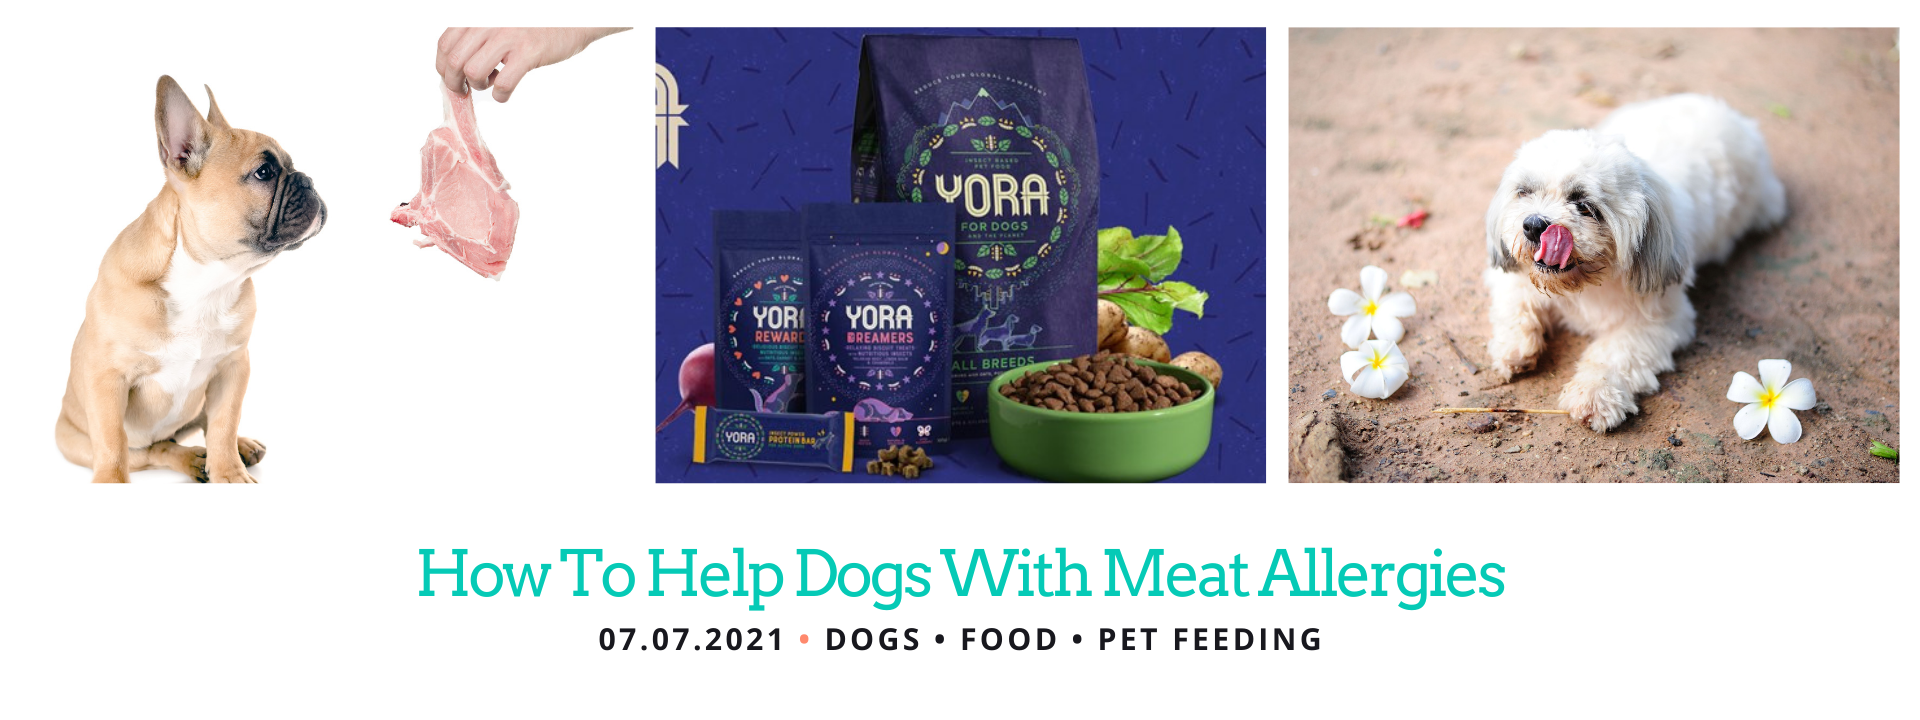 Dogs Allergic to Meat Protein